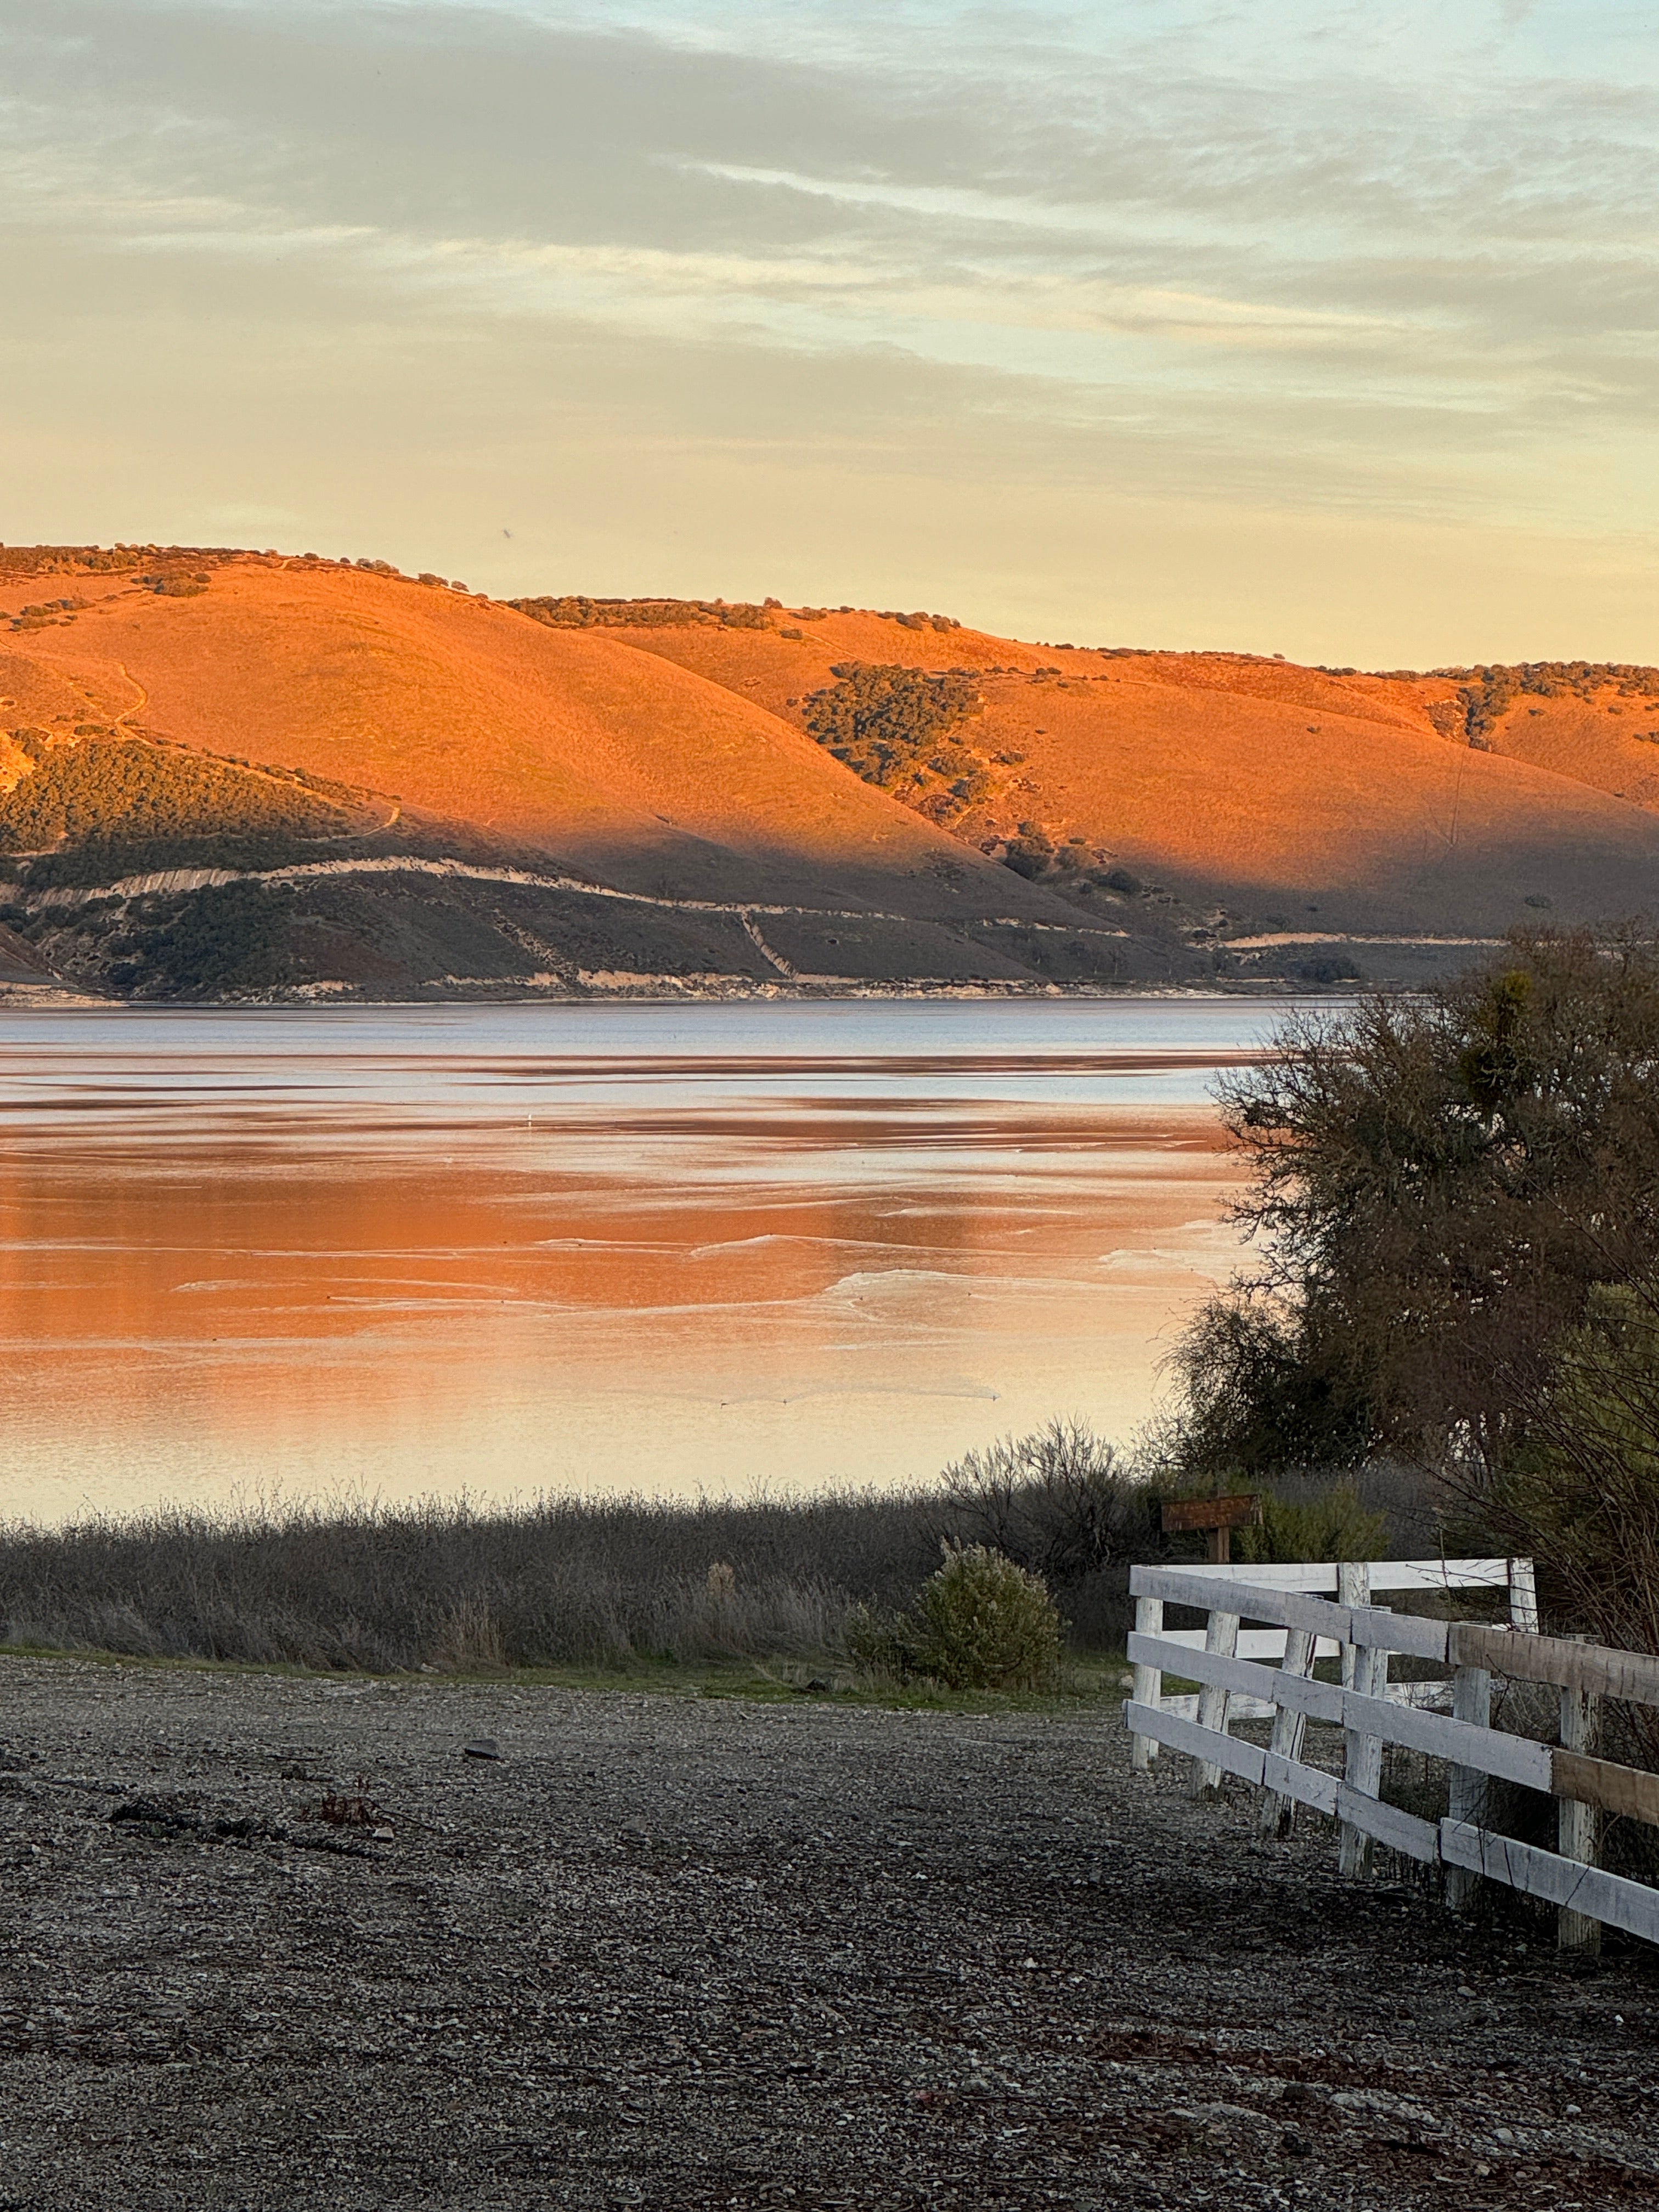 Camper submitted image from Monterey County Lake San Antonio South Shore - 1